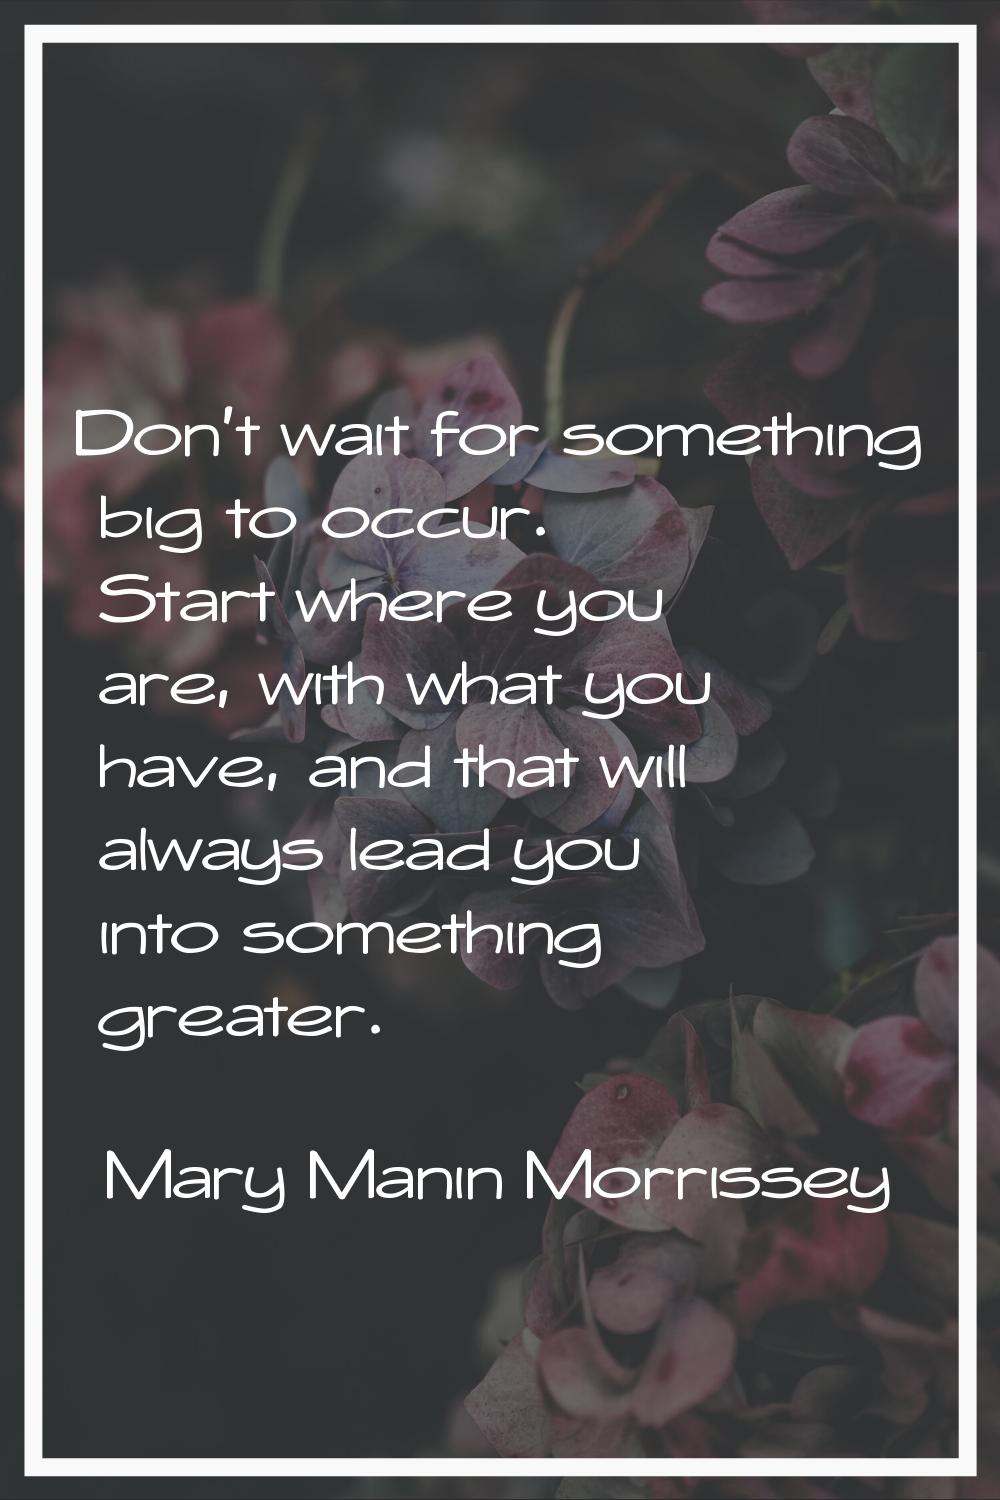 Don't wait for something big to occur. Start where you are, with what you have, and that will alway